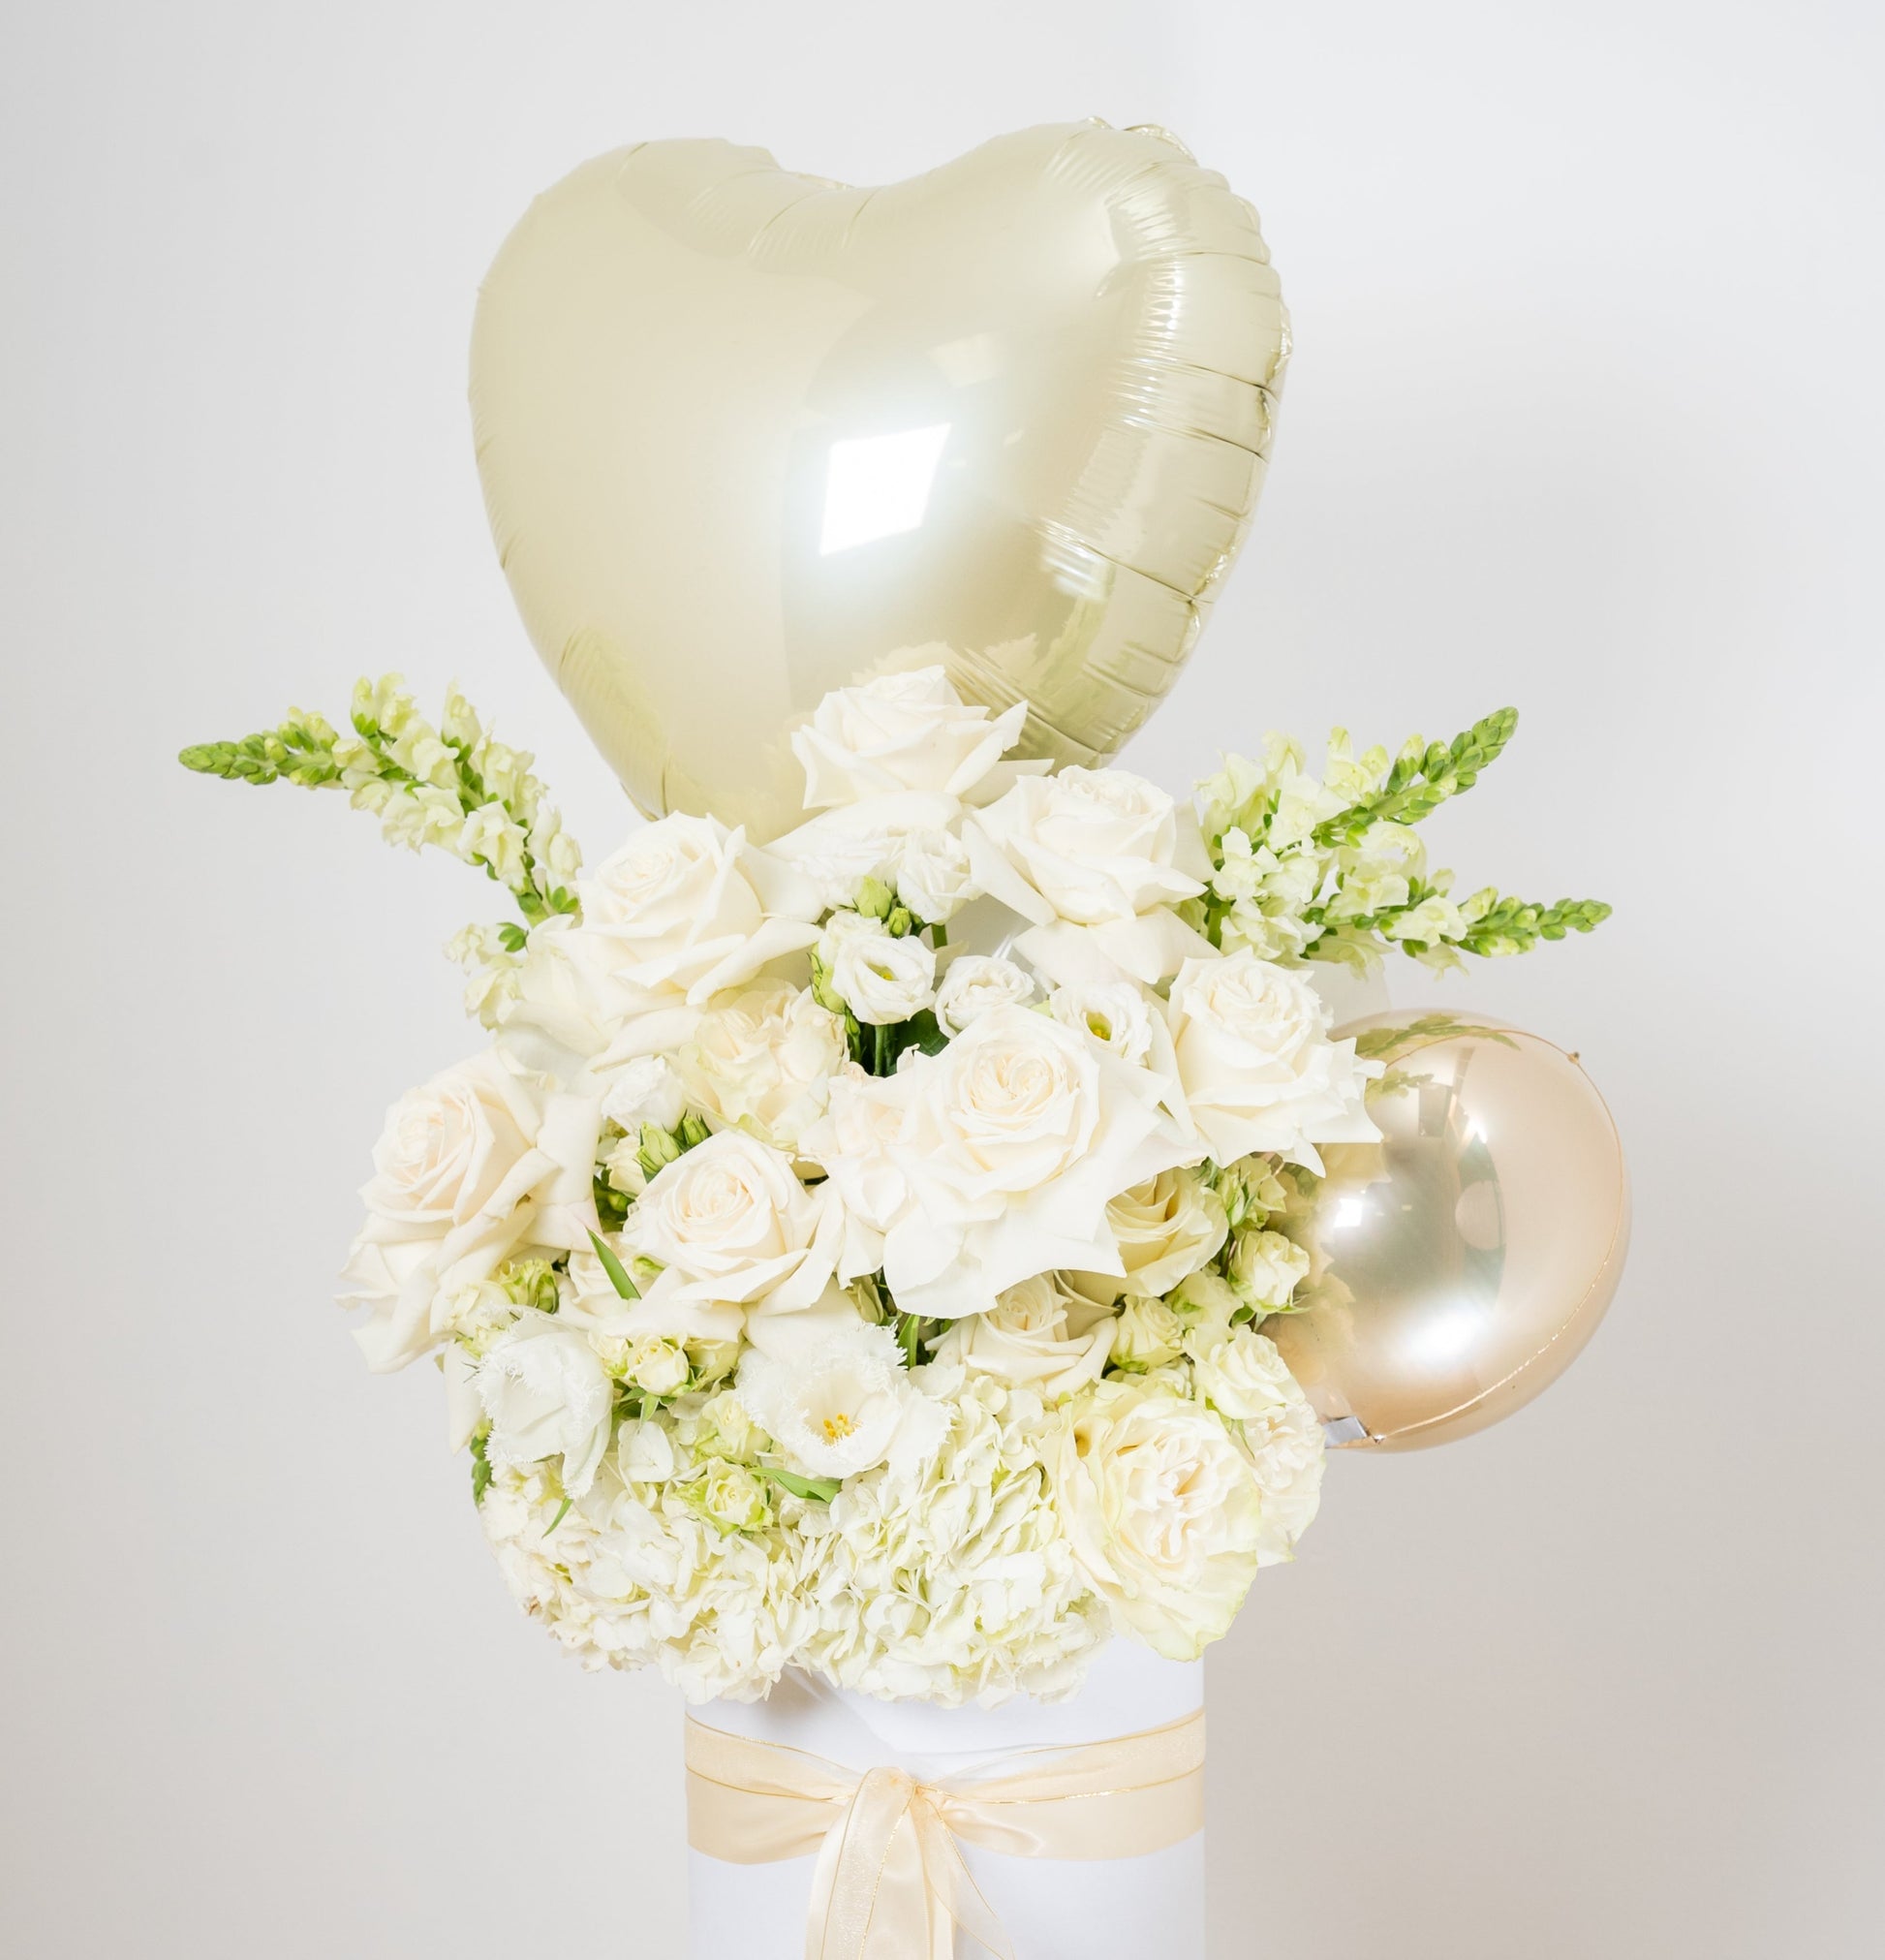 white flower arrangement with a heart balloon on topinside of a white box